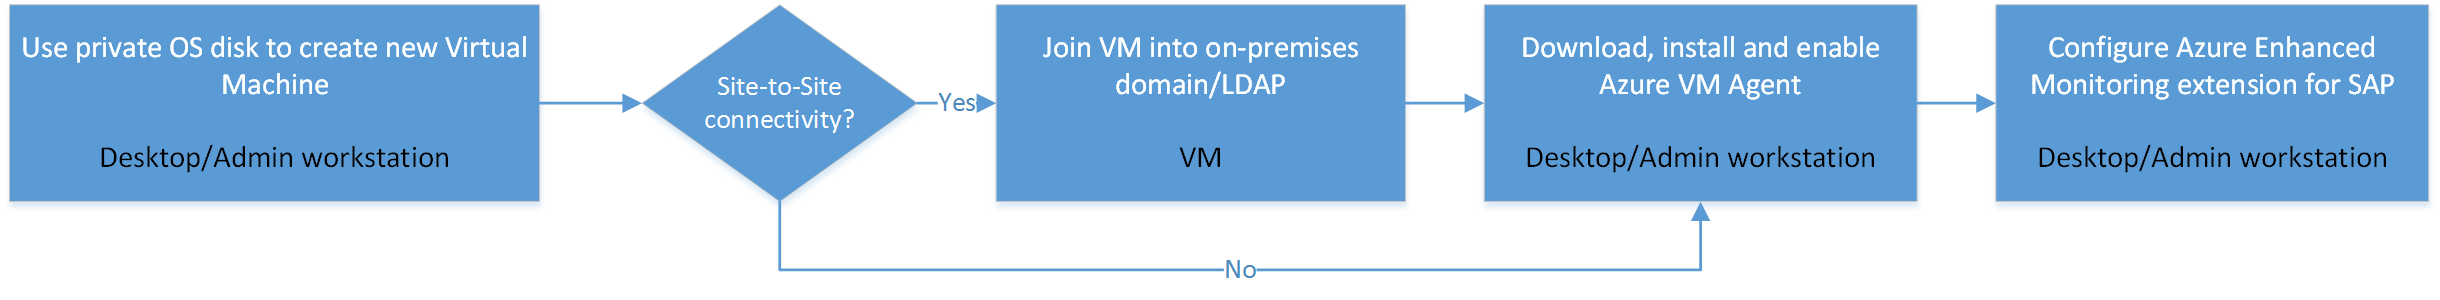 Flowchart of VM deployment for SAP systems by using a VM disk